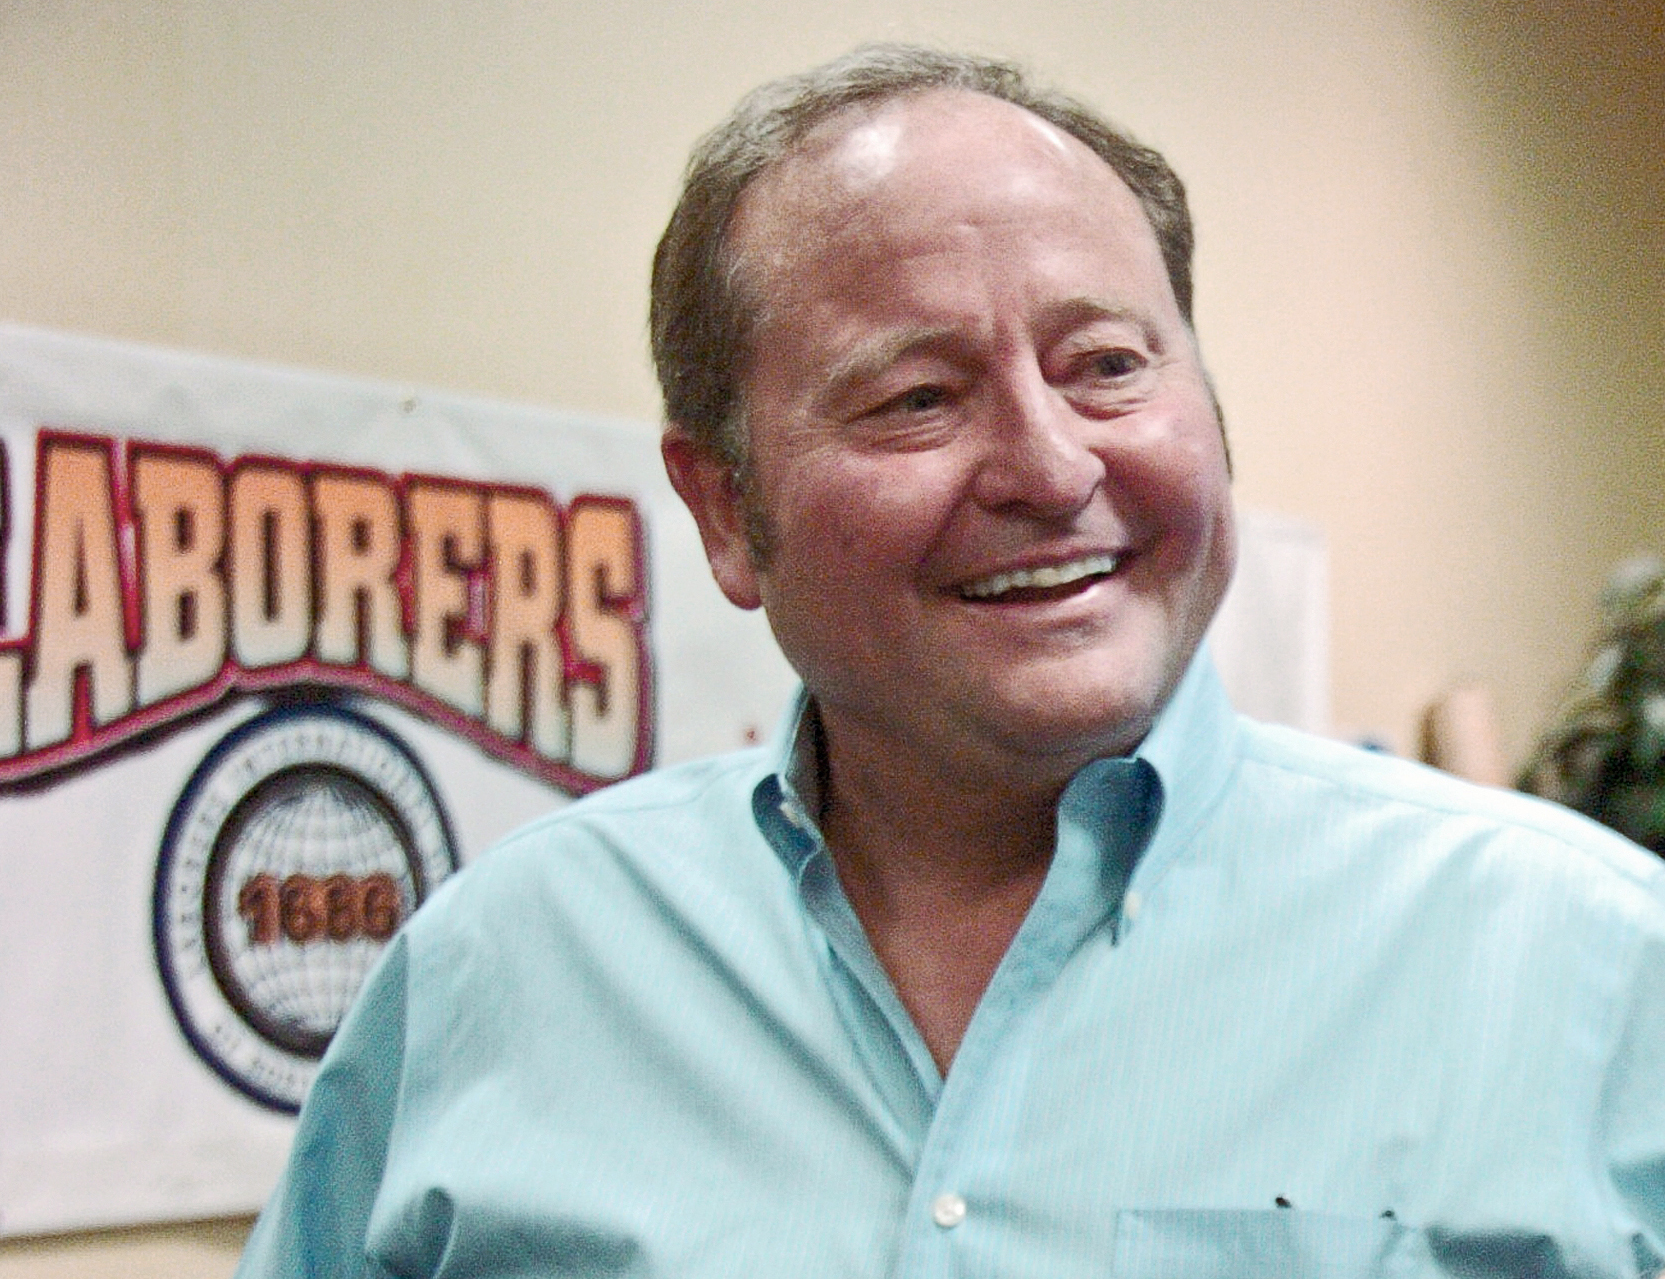 Former Democratic Montana Gov. Brian Schweitzer at the Montana AFL-CIO annual convention in Billings, Mont. on May 10, 2013